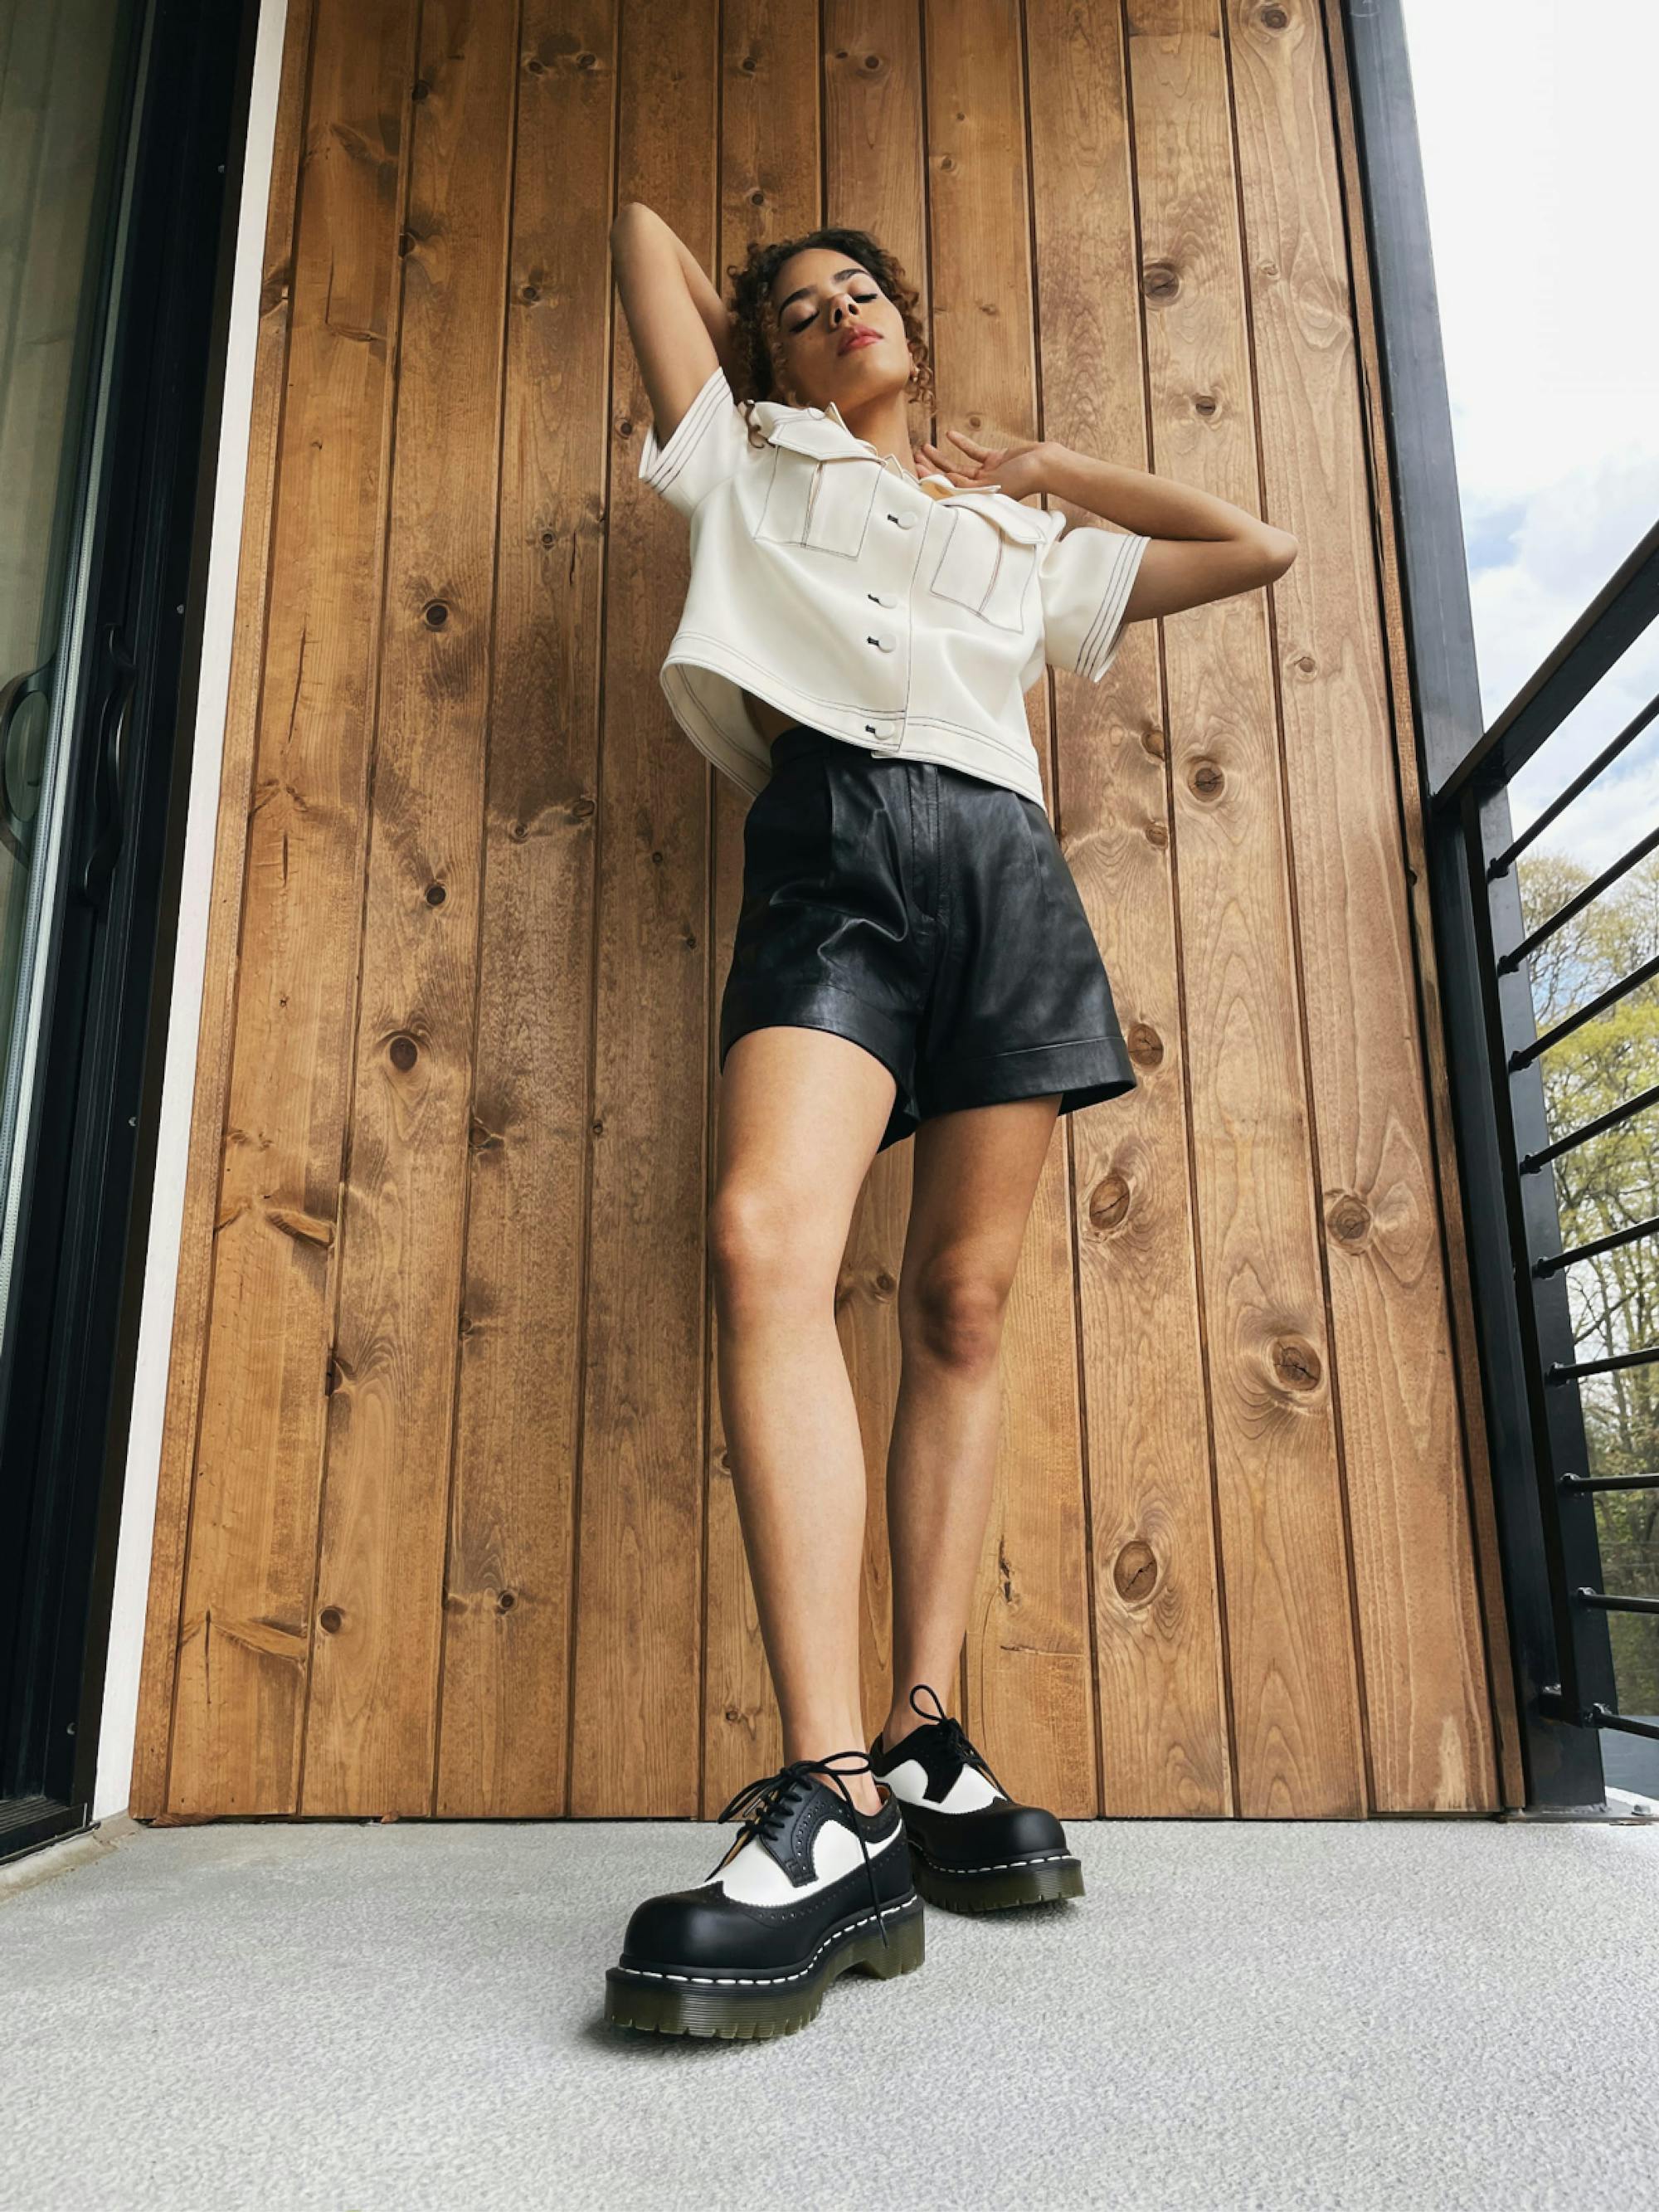 Gentry wears a white blouse with chunky stitching, leather shorts, and black-and-white platform brogue shoes. Her arms are perched above her head, and she stands in front of a wood panelled wall.